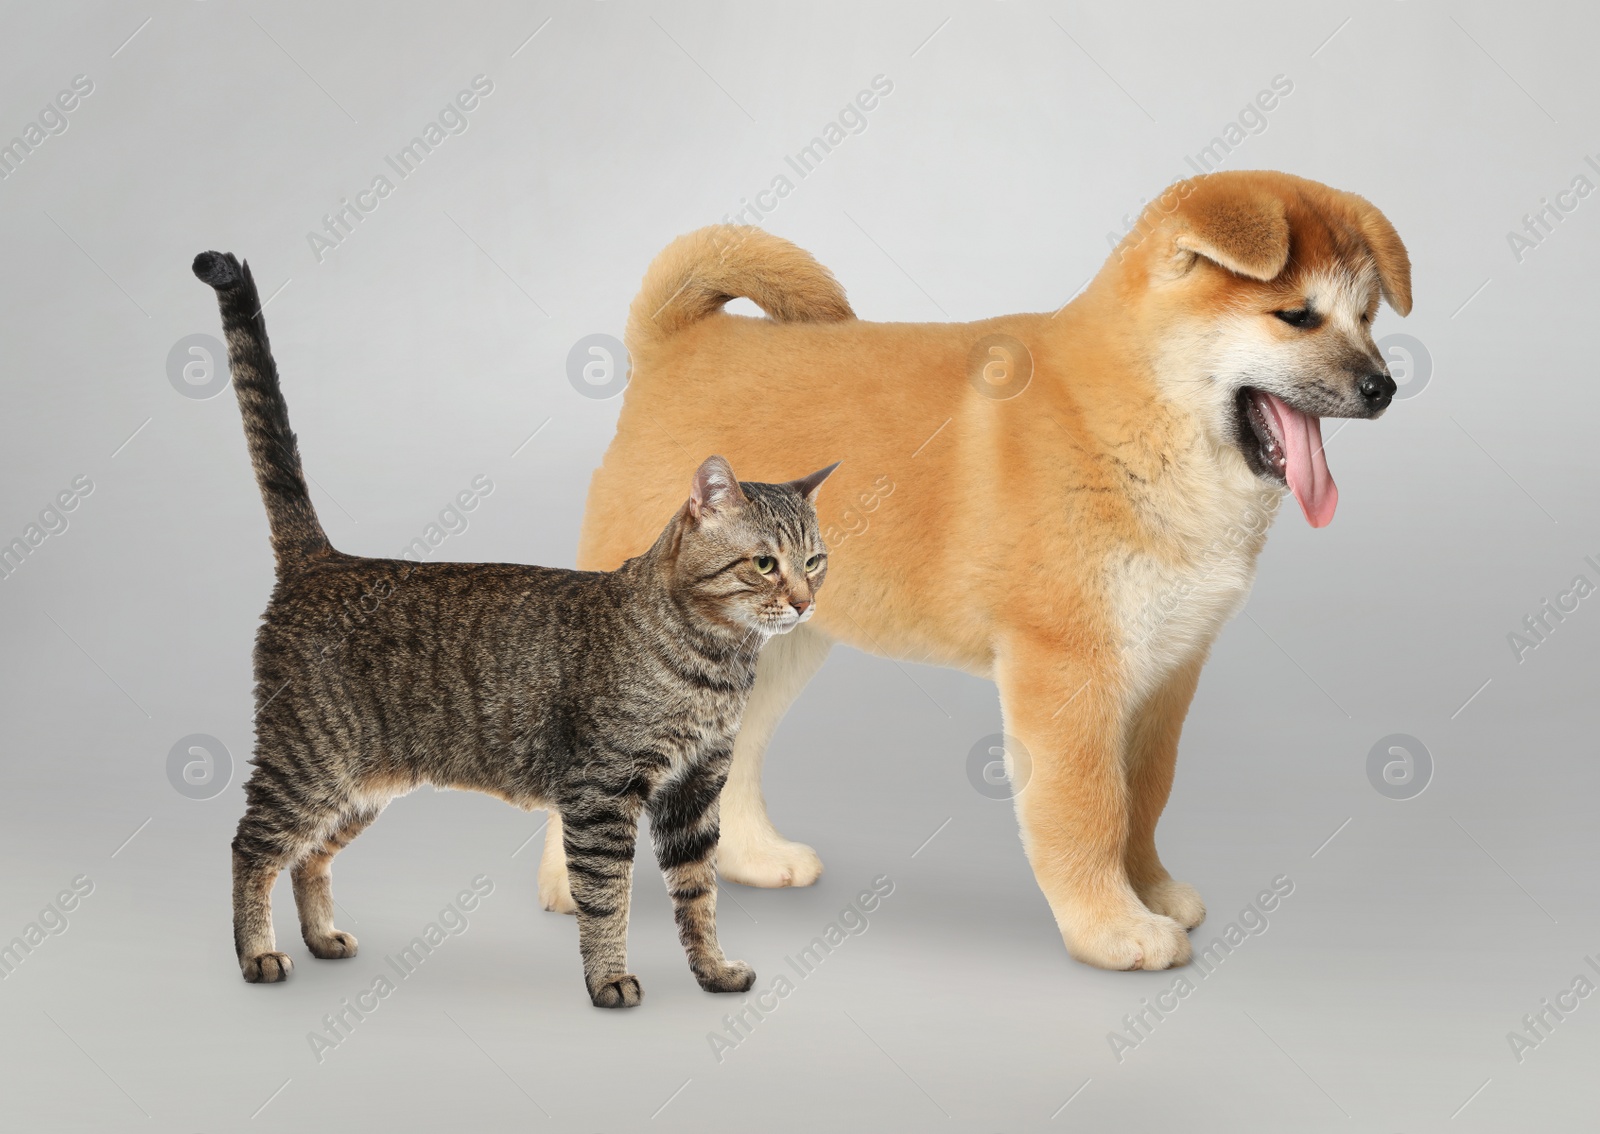 Image of Cute cat and dog on grey background. Animal friendship